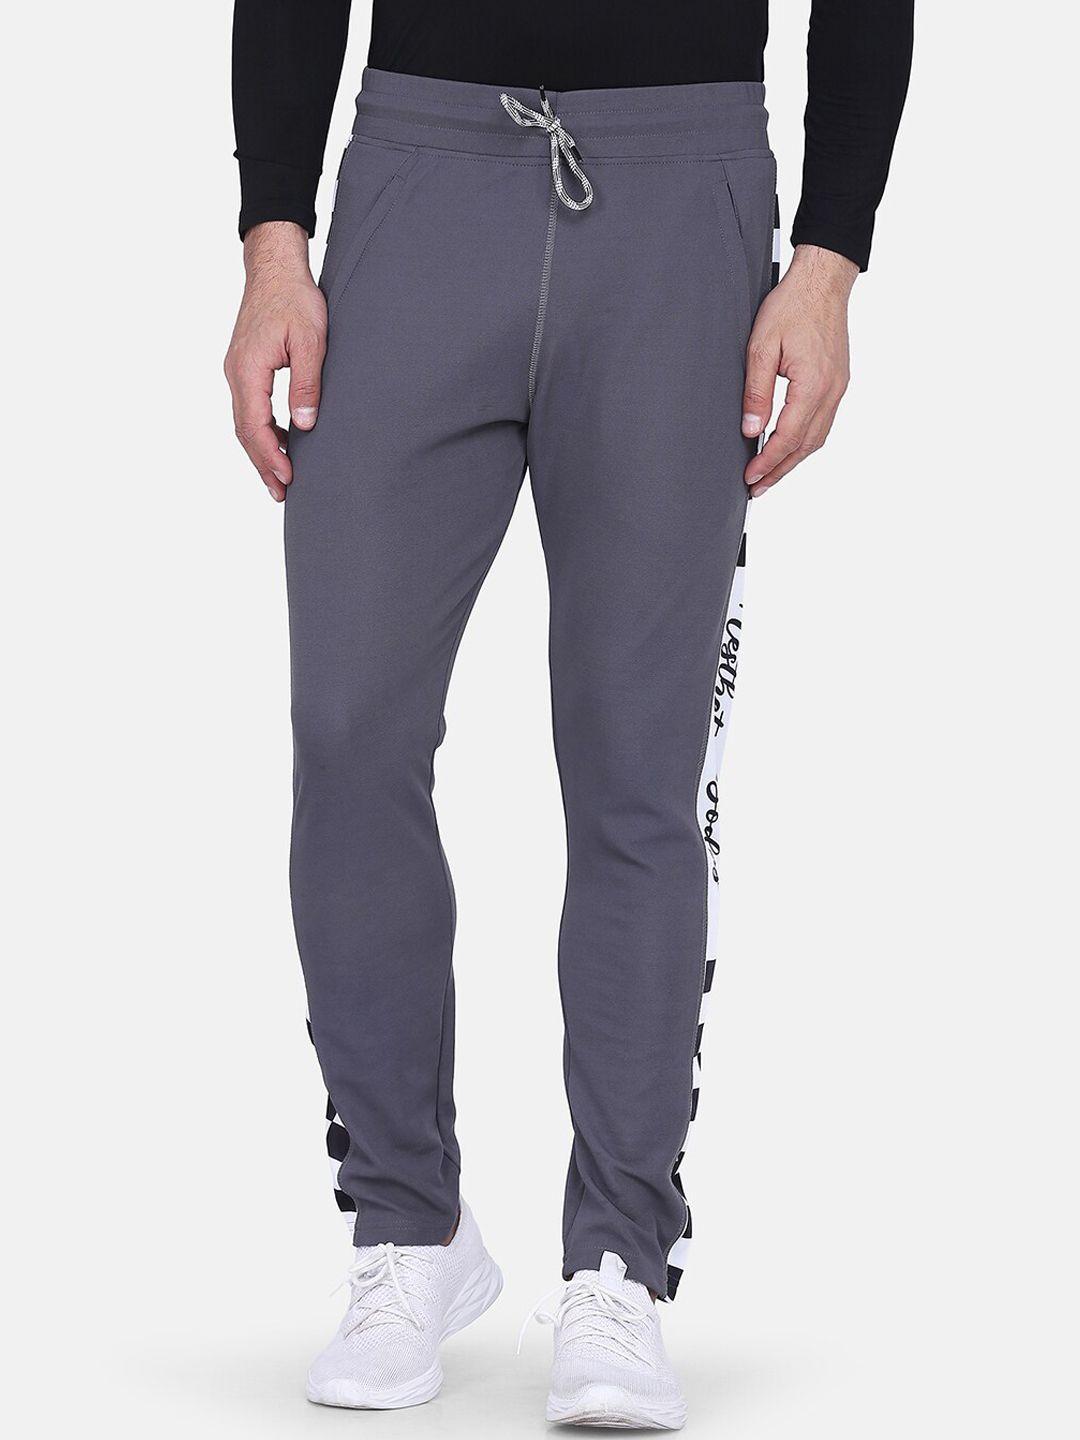 aesthetic bodies men grey solid slim-fit training or gym track pants